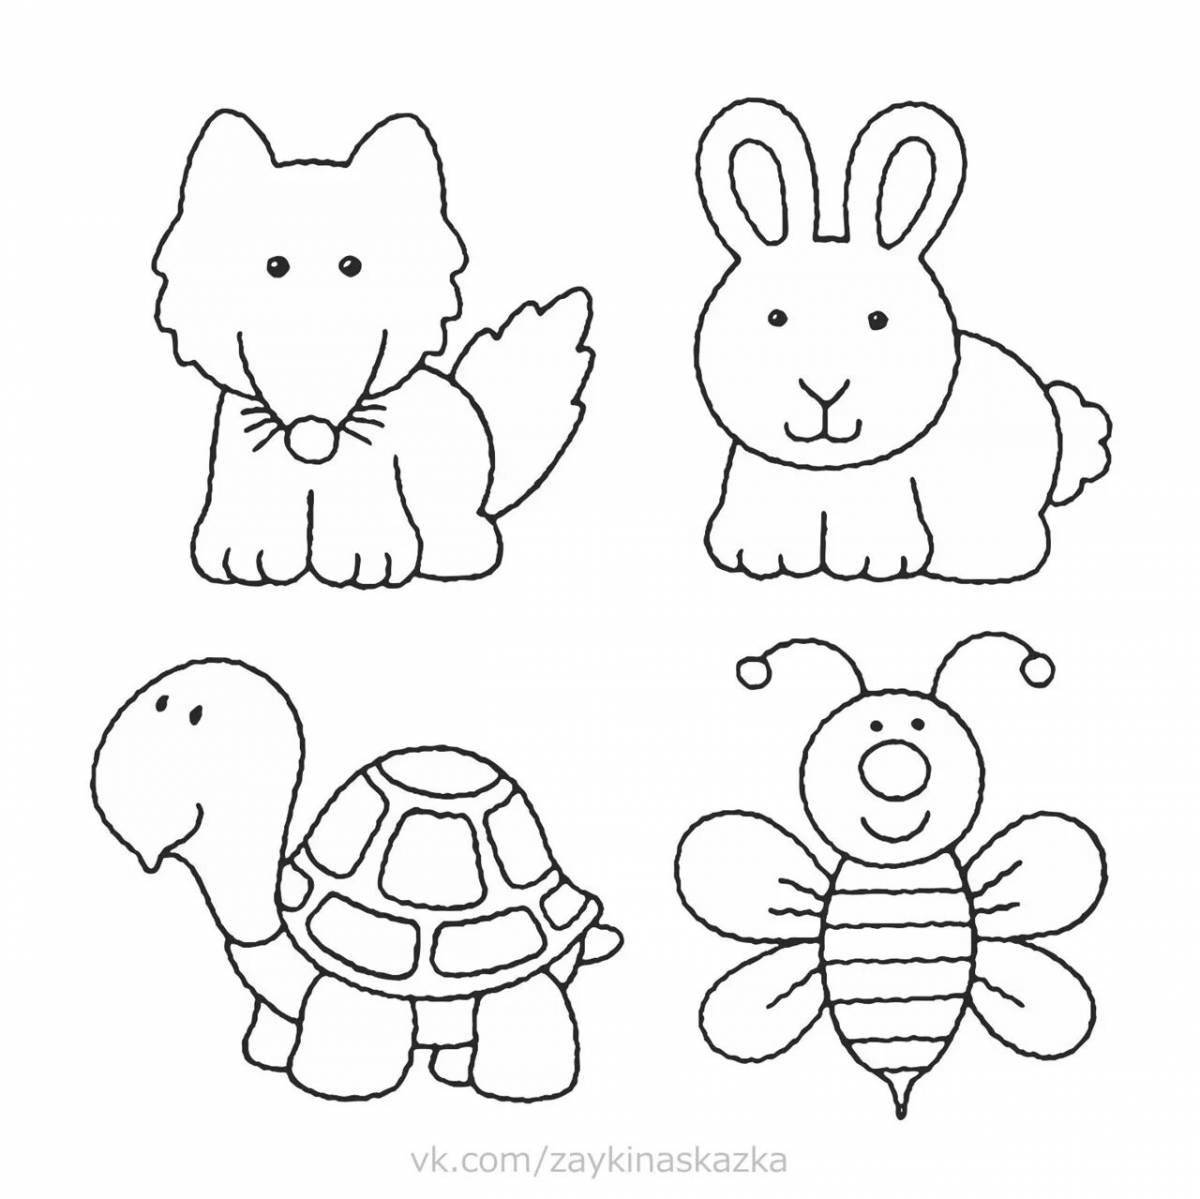 Violent animal coloring pages for 2-3 year olds